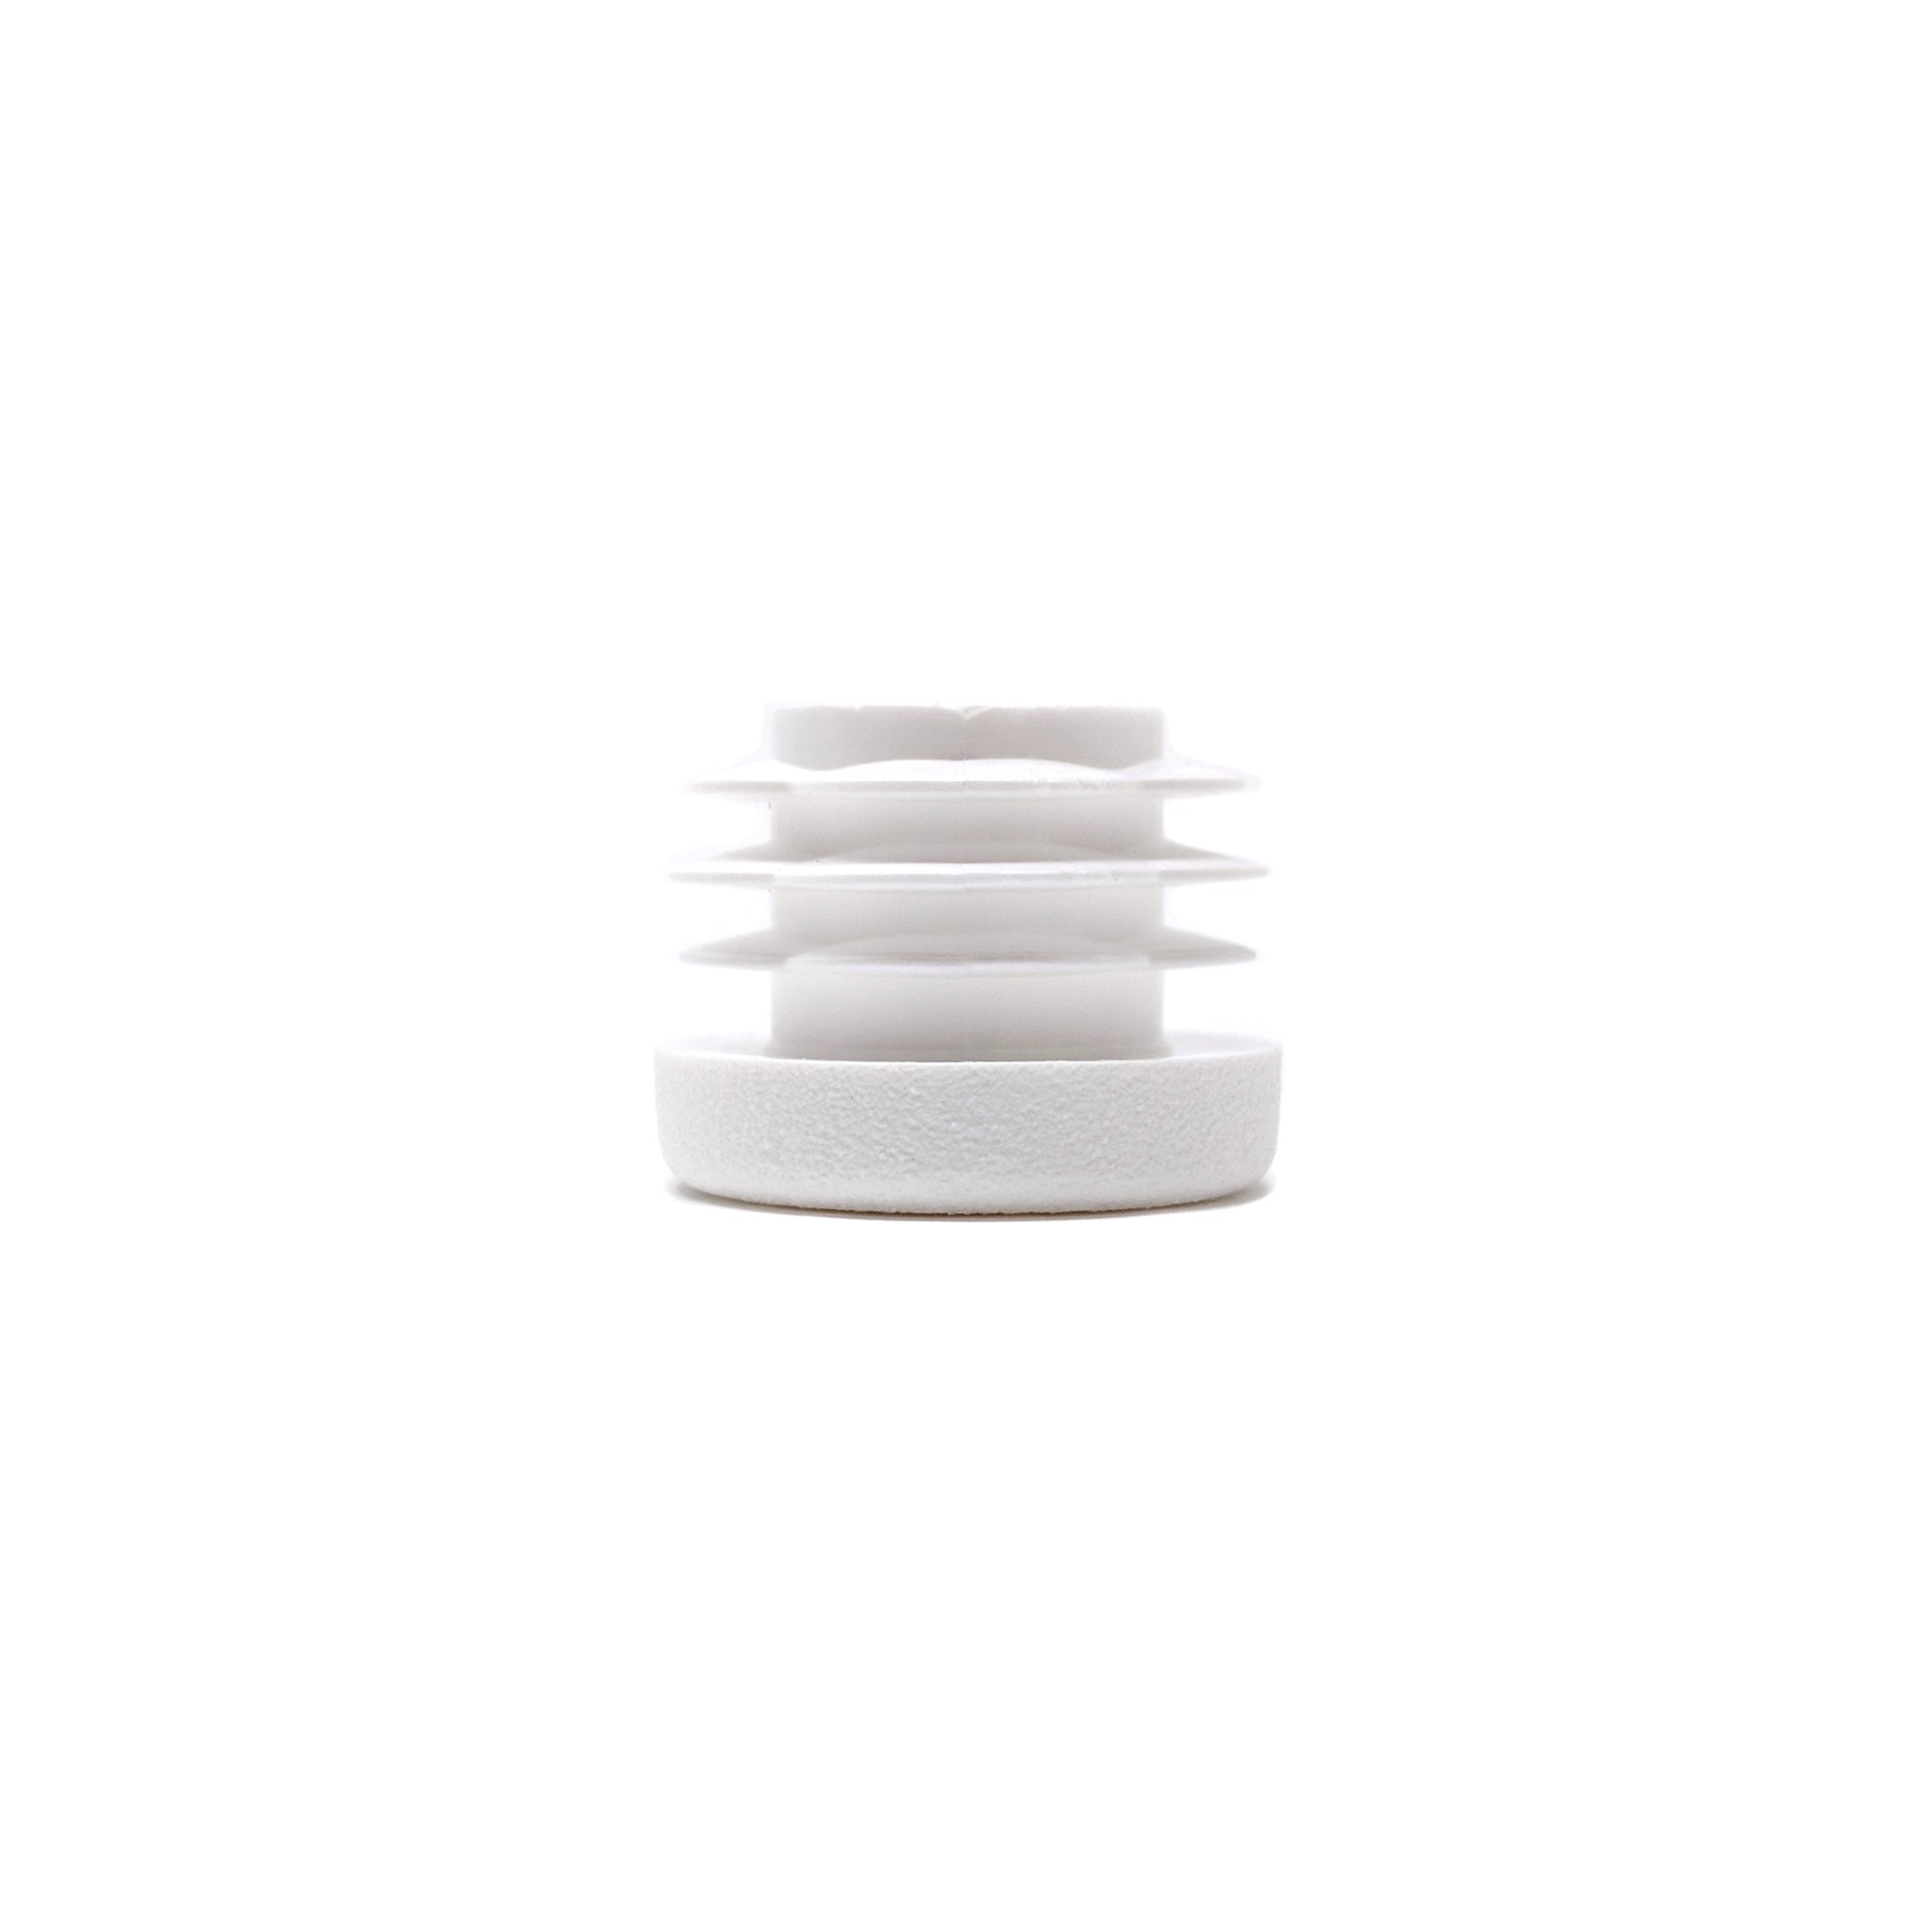 Round Tube Inserts 22mm White | Made in Germany | Keay Vital Parts - Keay Vital Parts